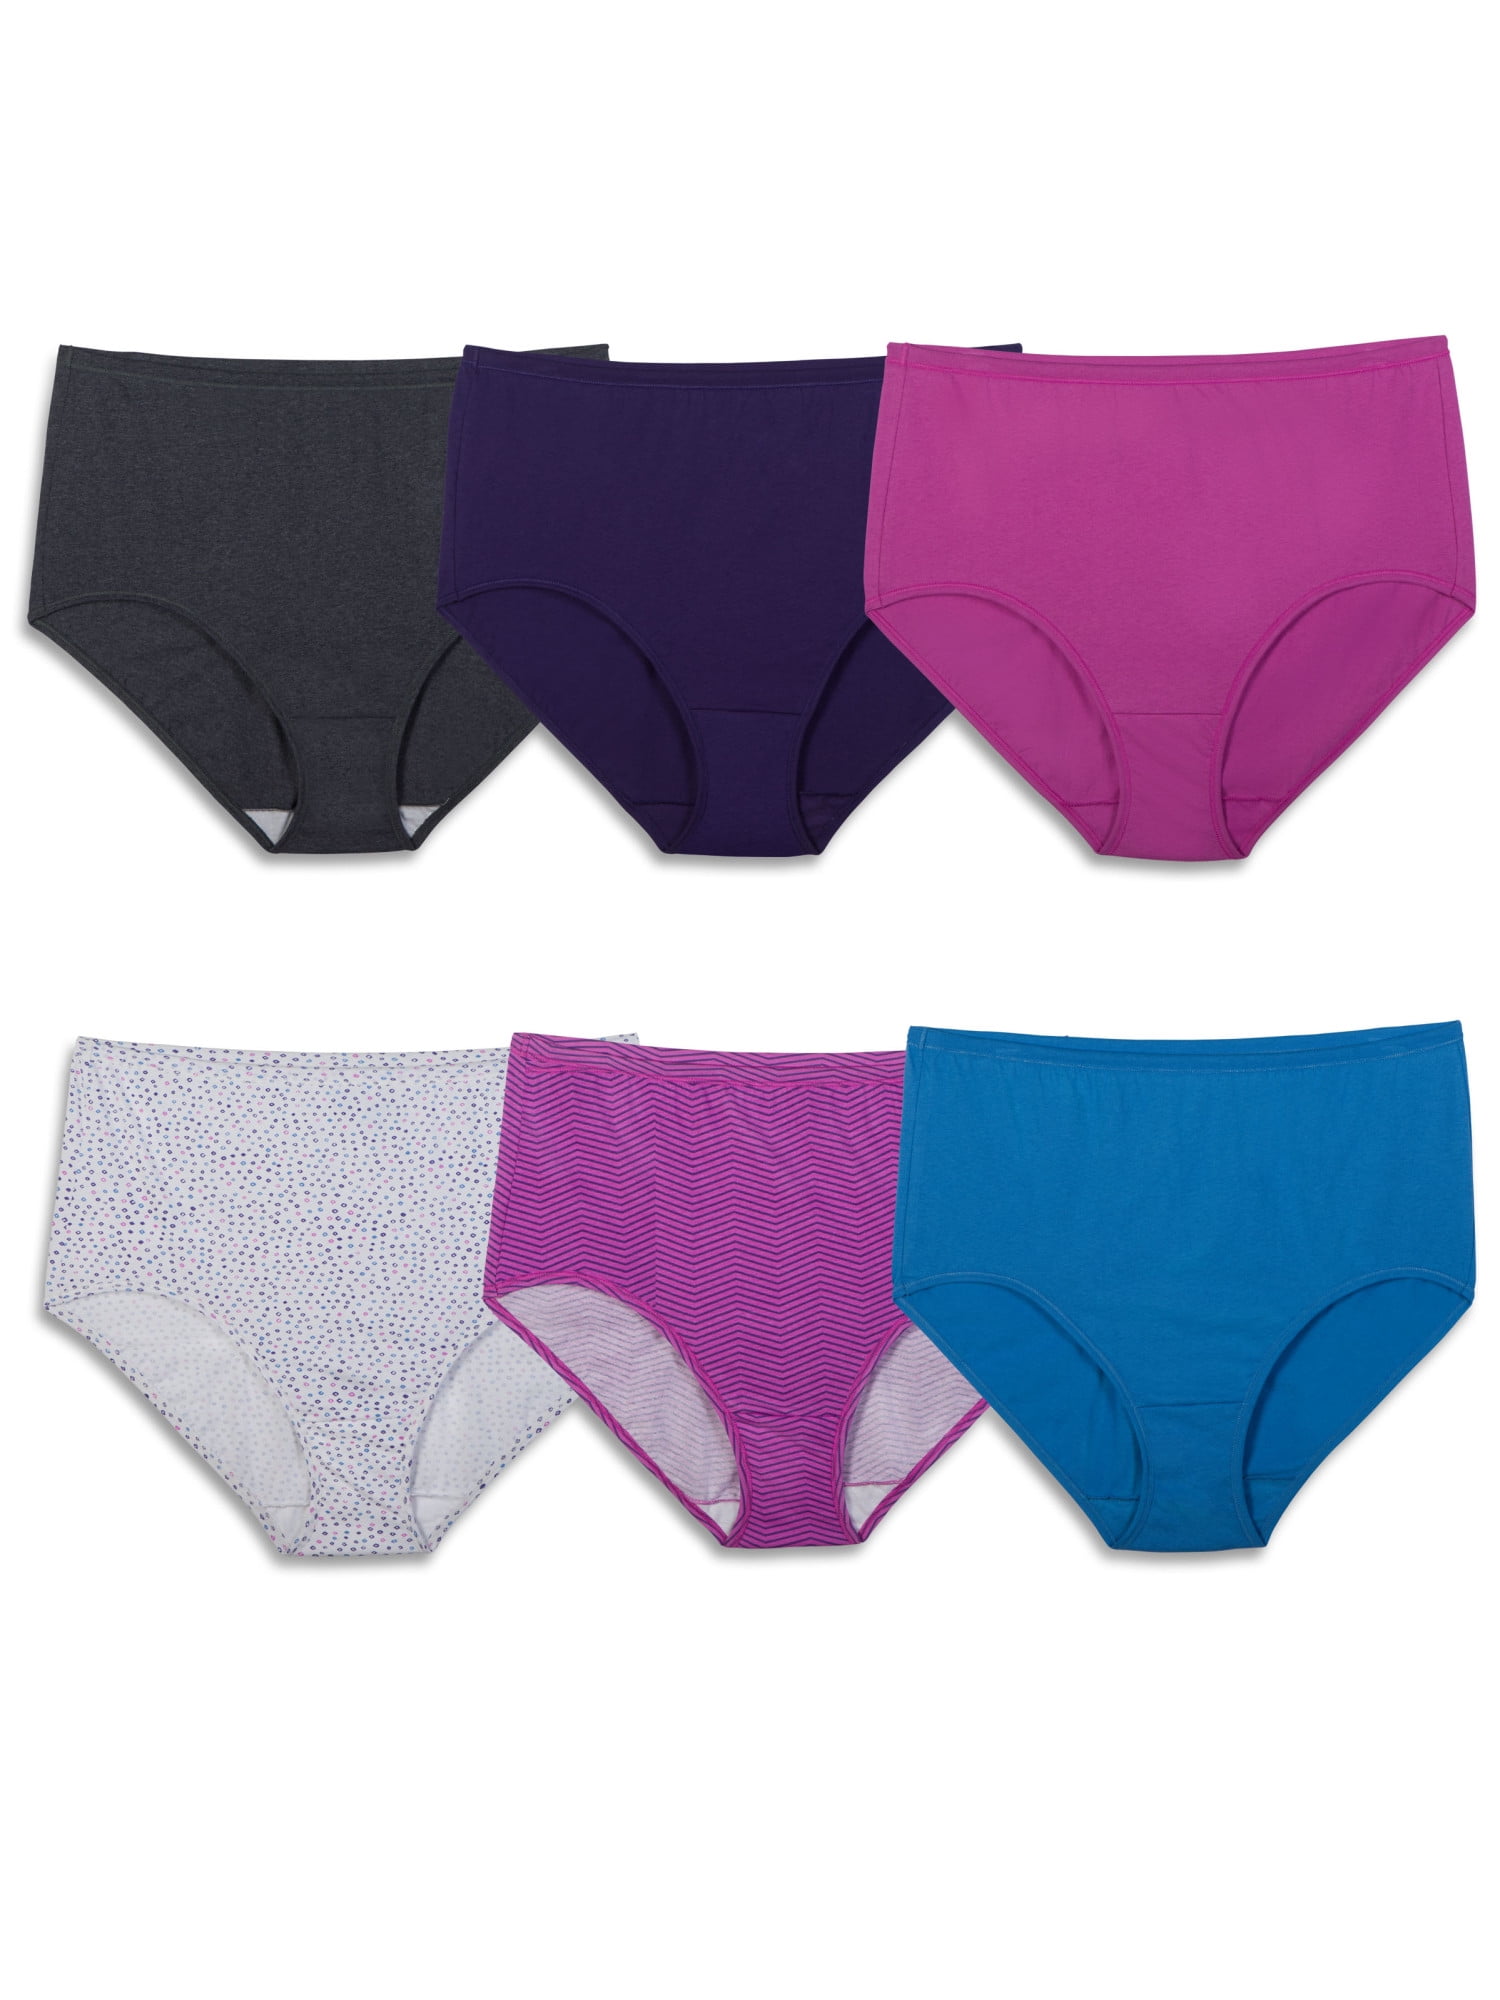 Fruit of the Loom Women's Comfort Covered Cotton Brief Underwear, 6-Pack 